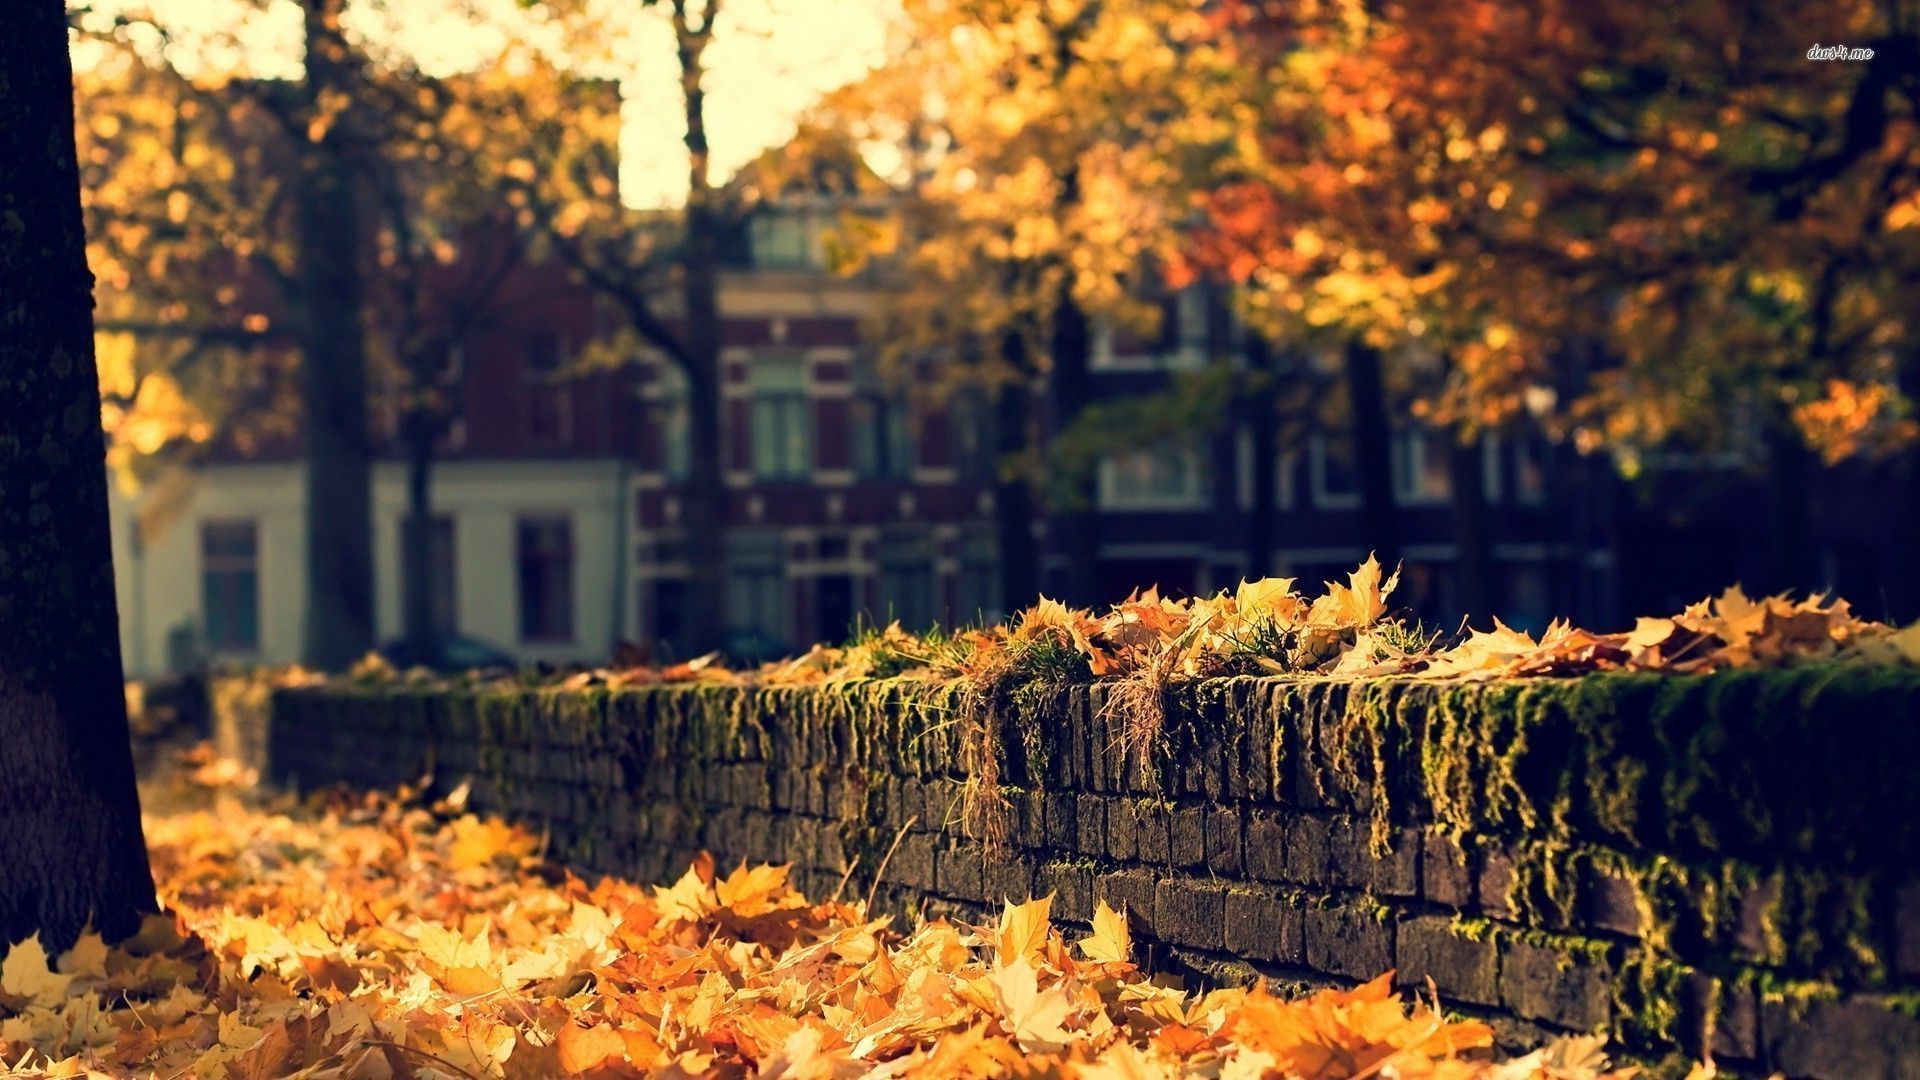 A wall covered in leaves in the fall - 1920x1080